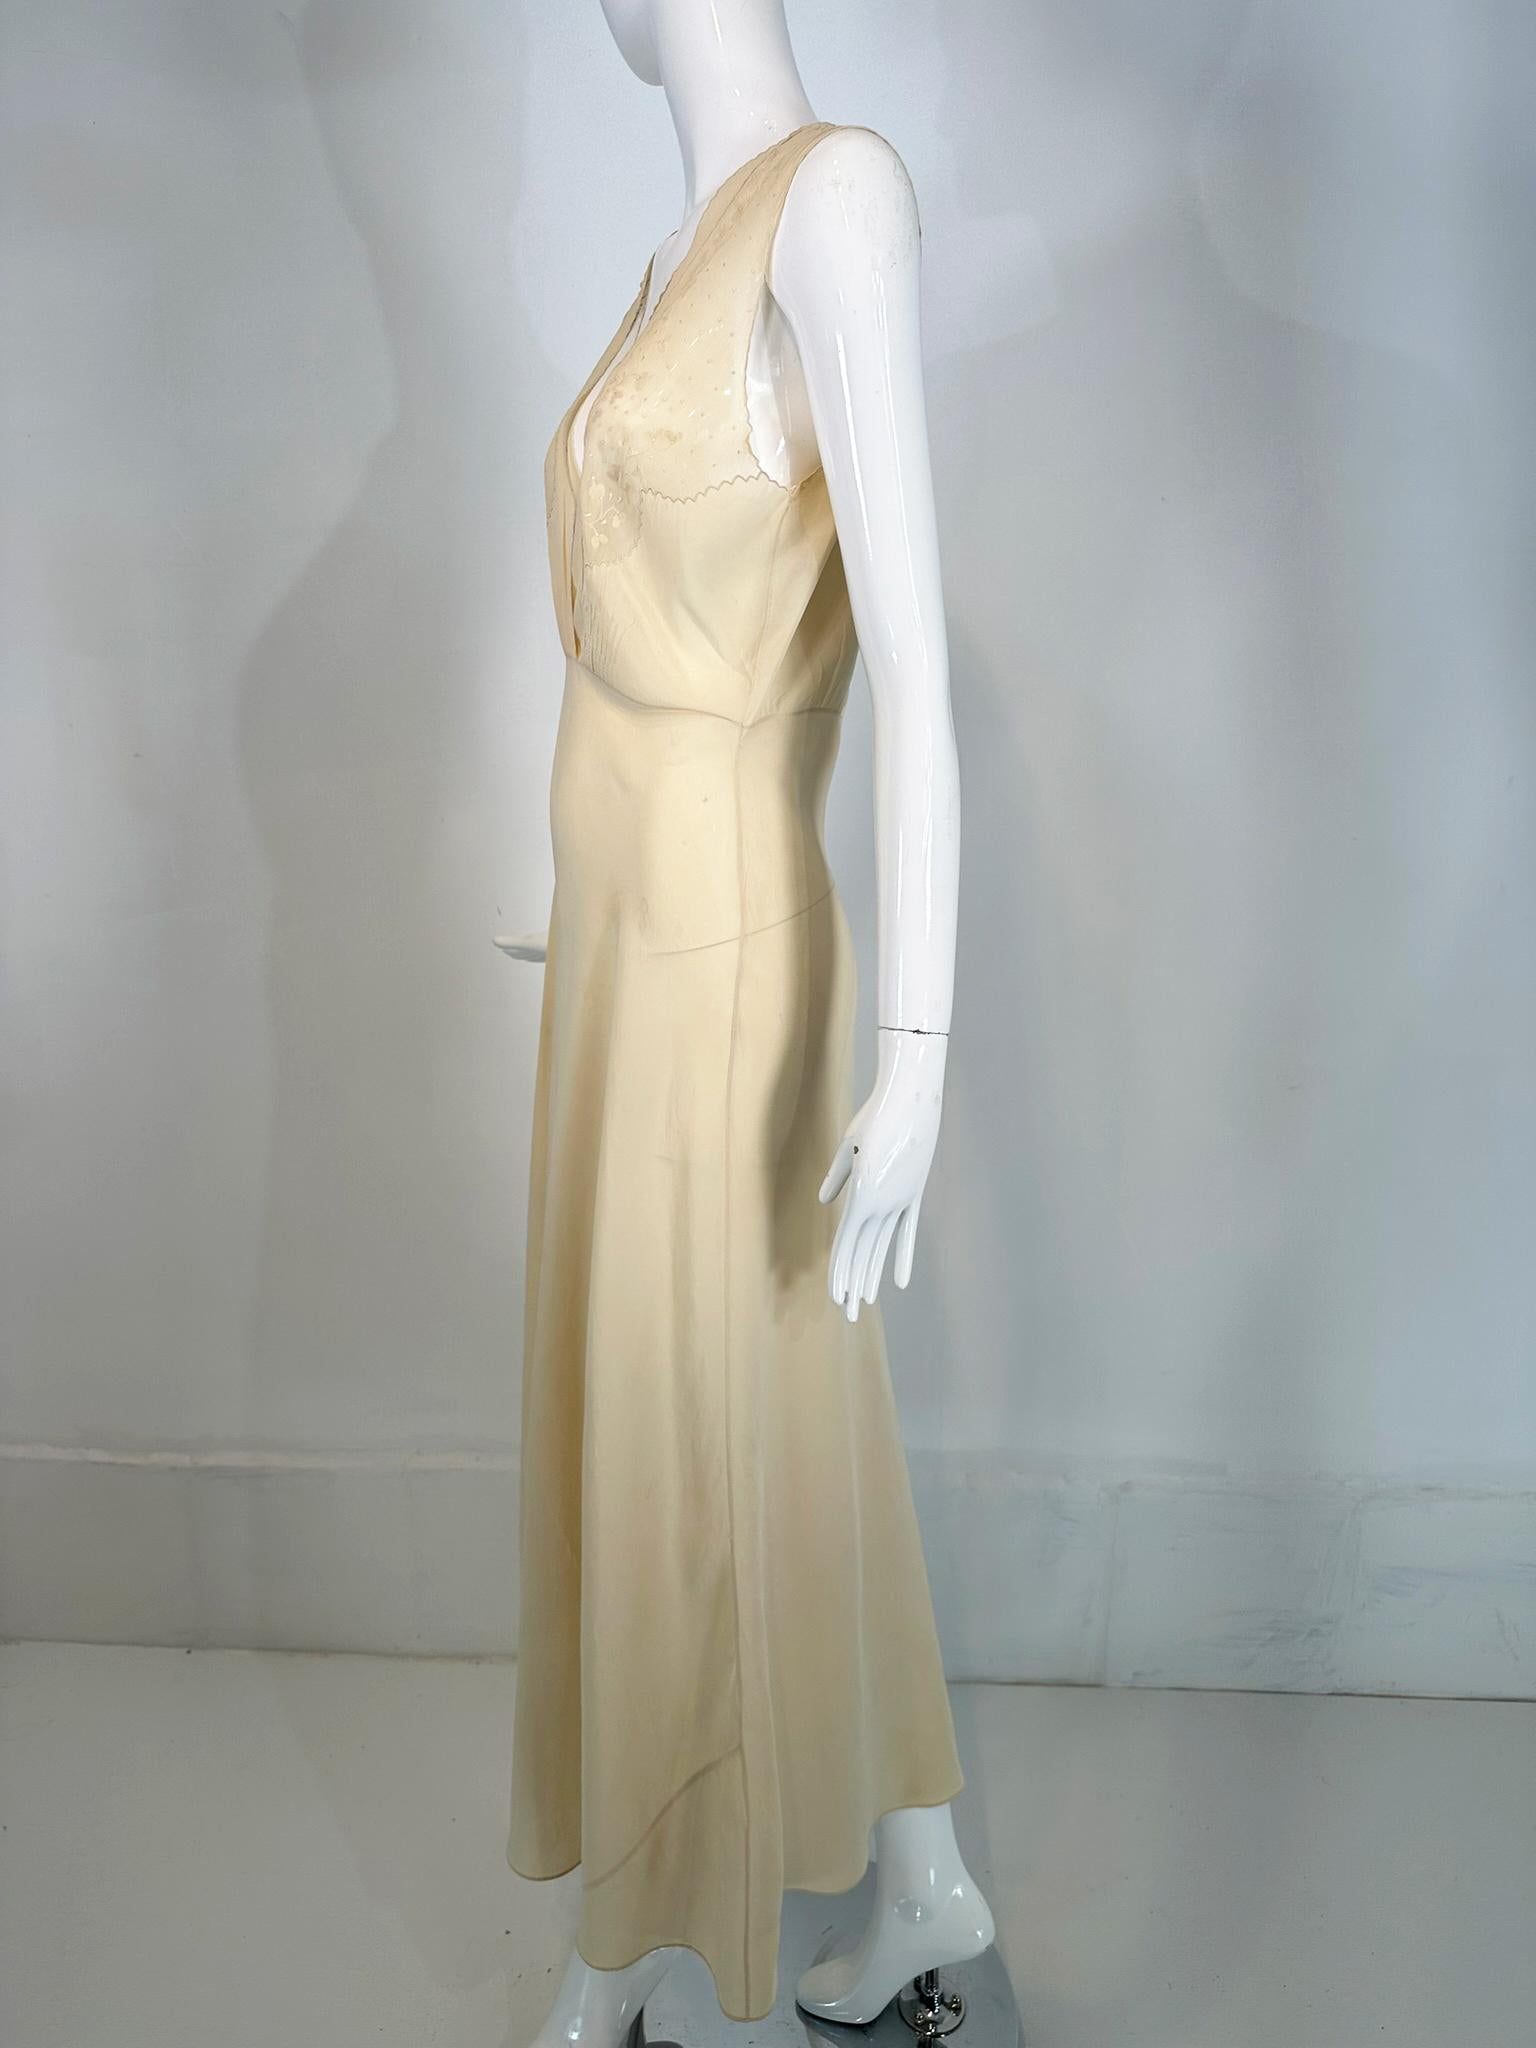 1930s Cream Bias Cut Sheer Silk Hand Embroidered & Appliqued Slip Dress Gown For Sale 8